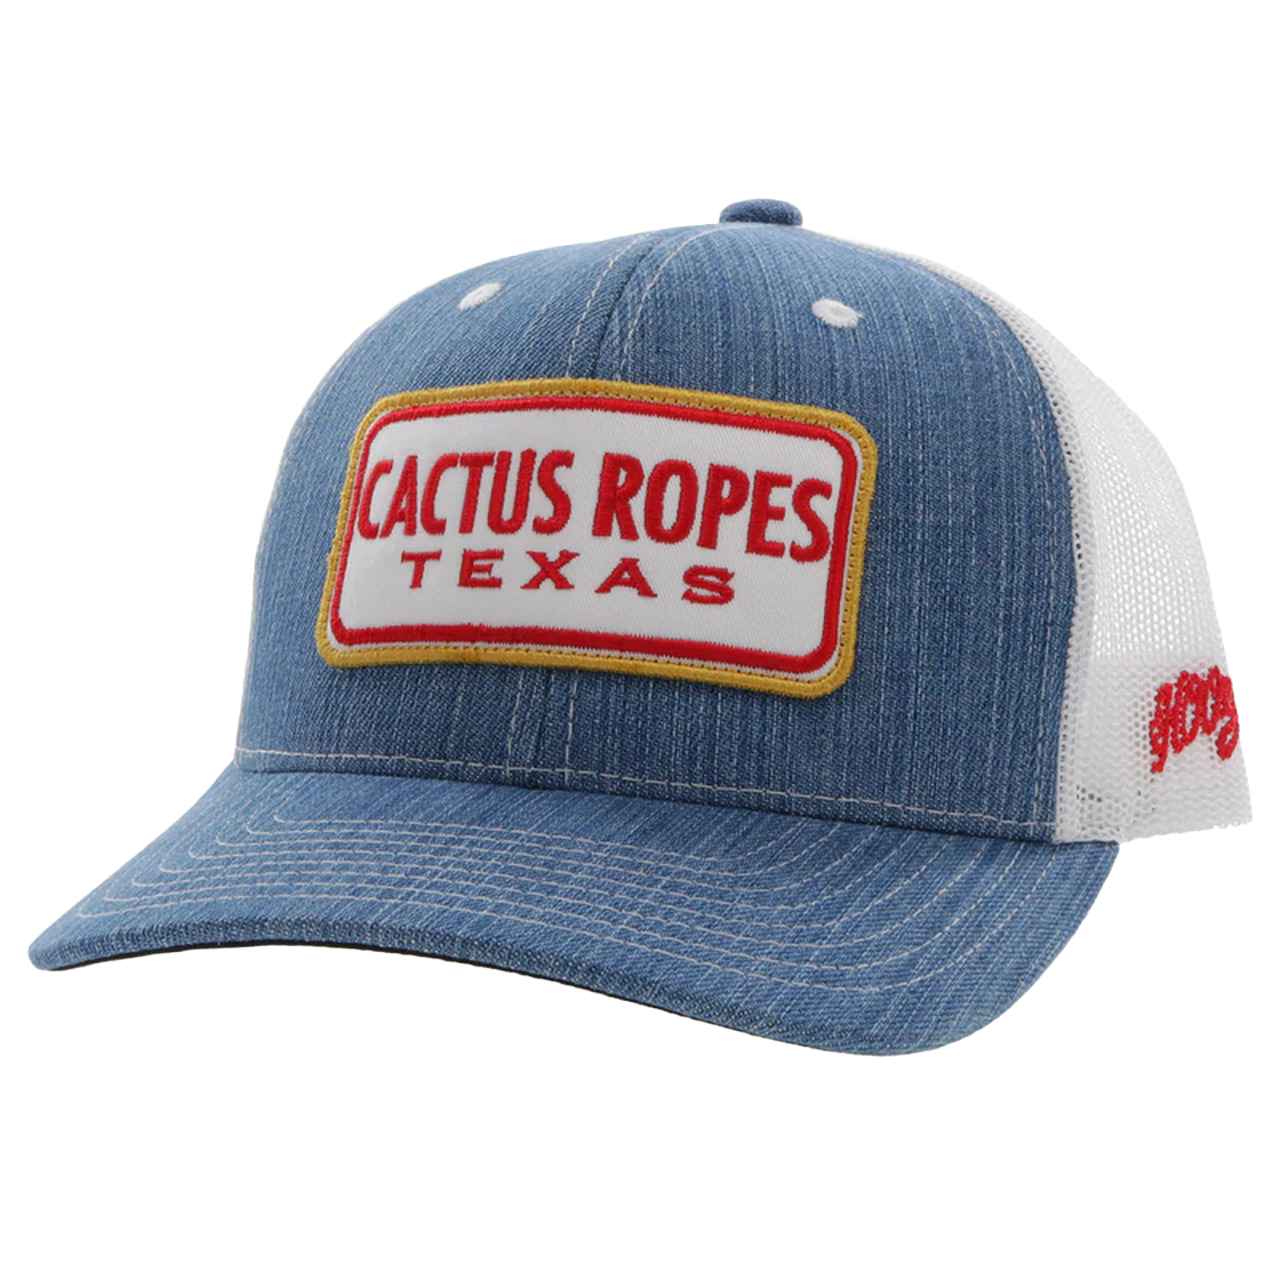 Hooey® Youth Cactus Ropes Denim and White Snapback Hat CR080-Y